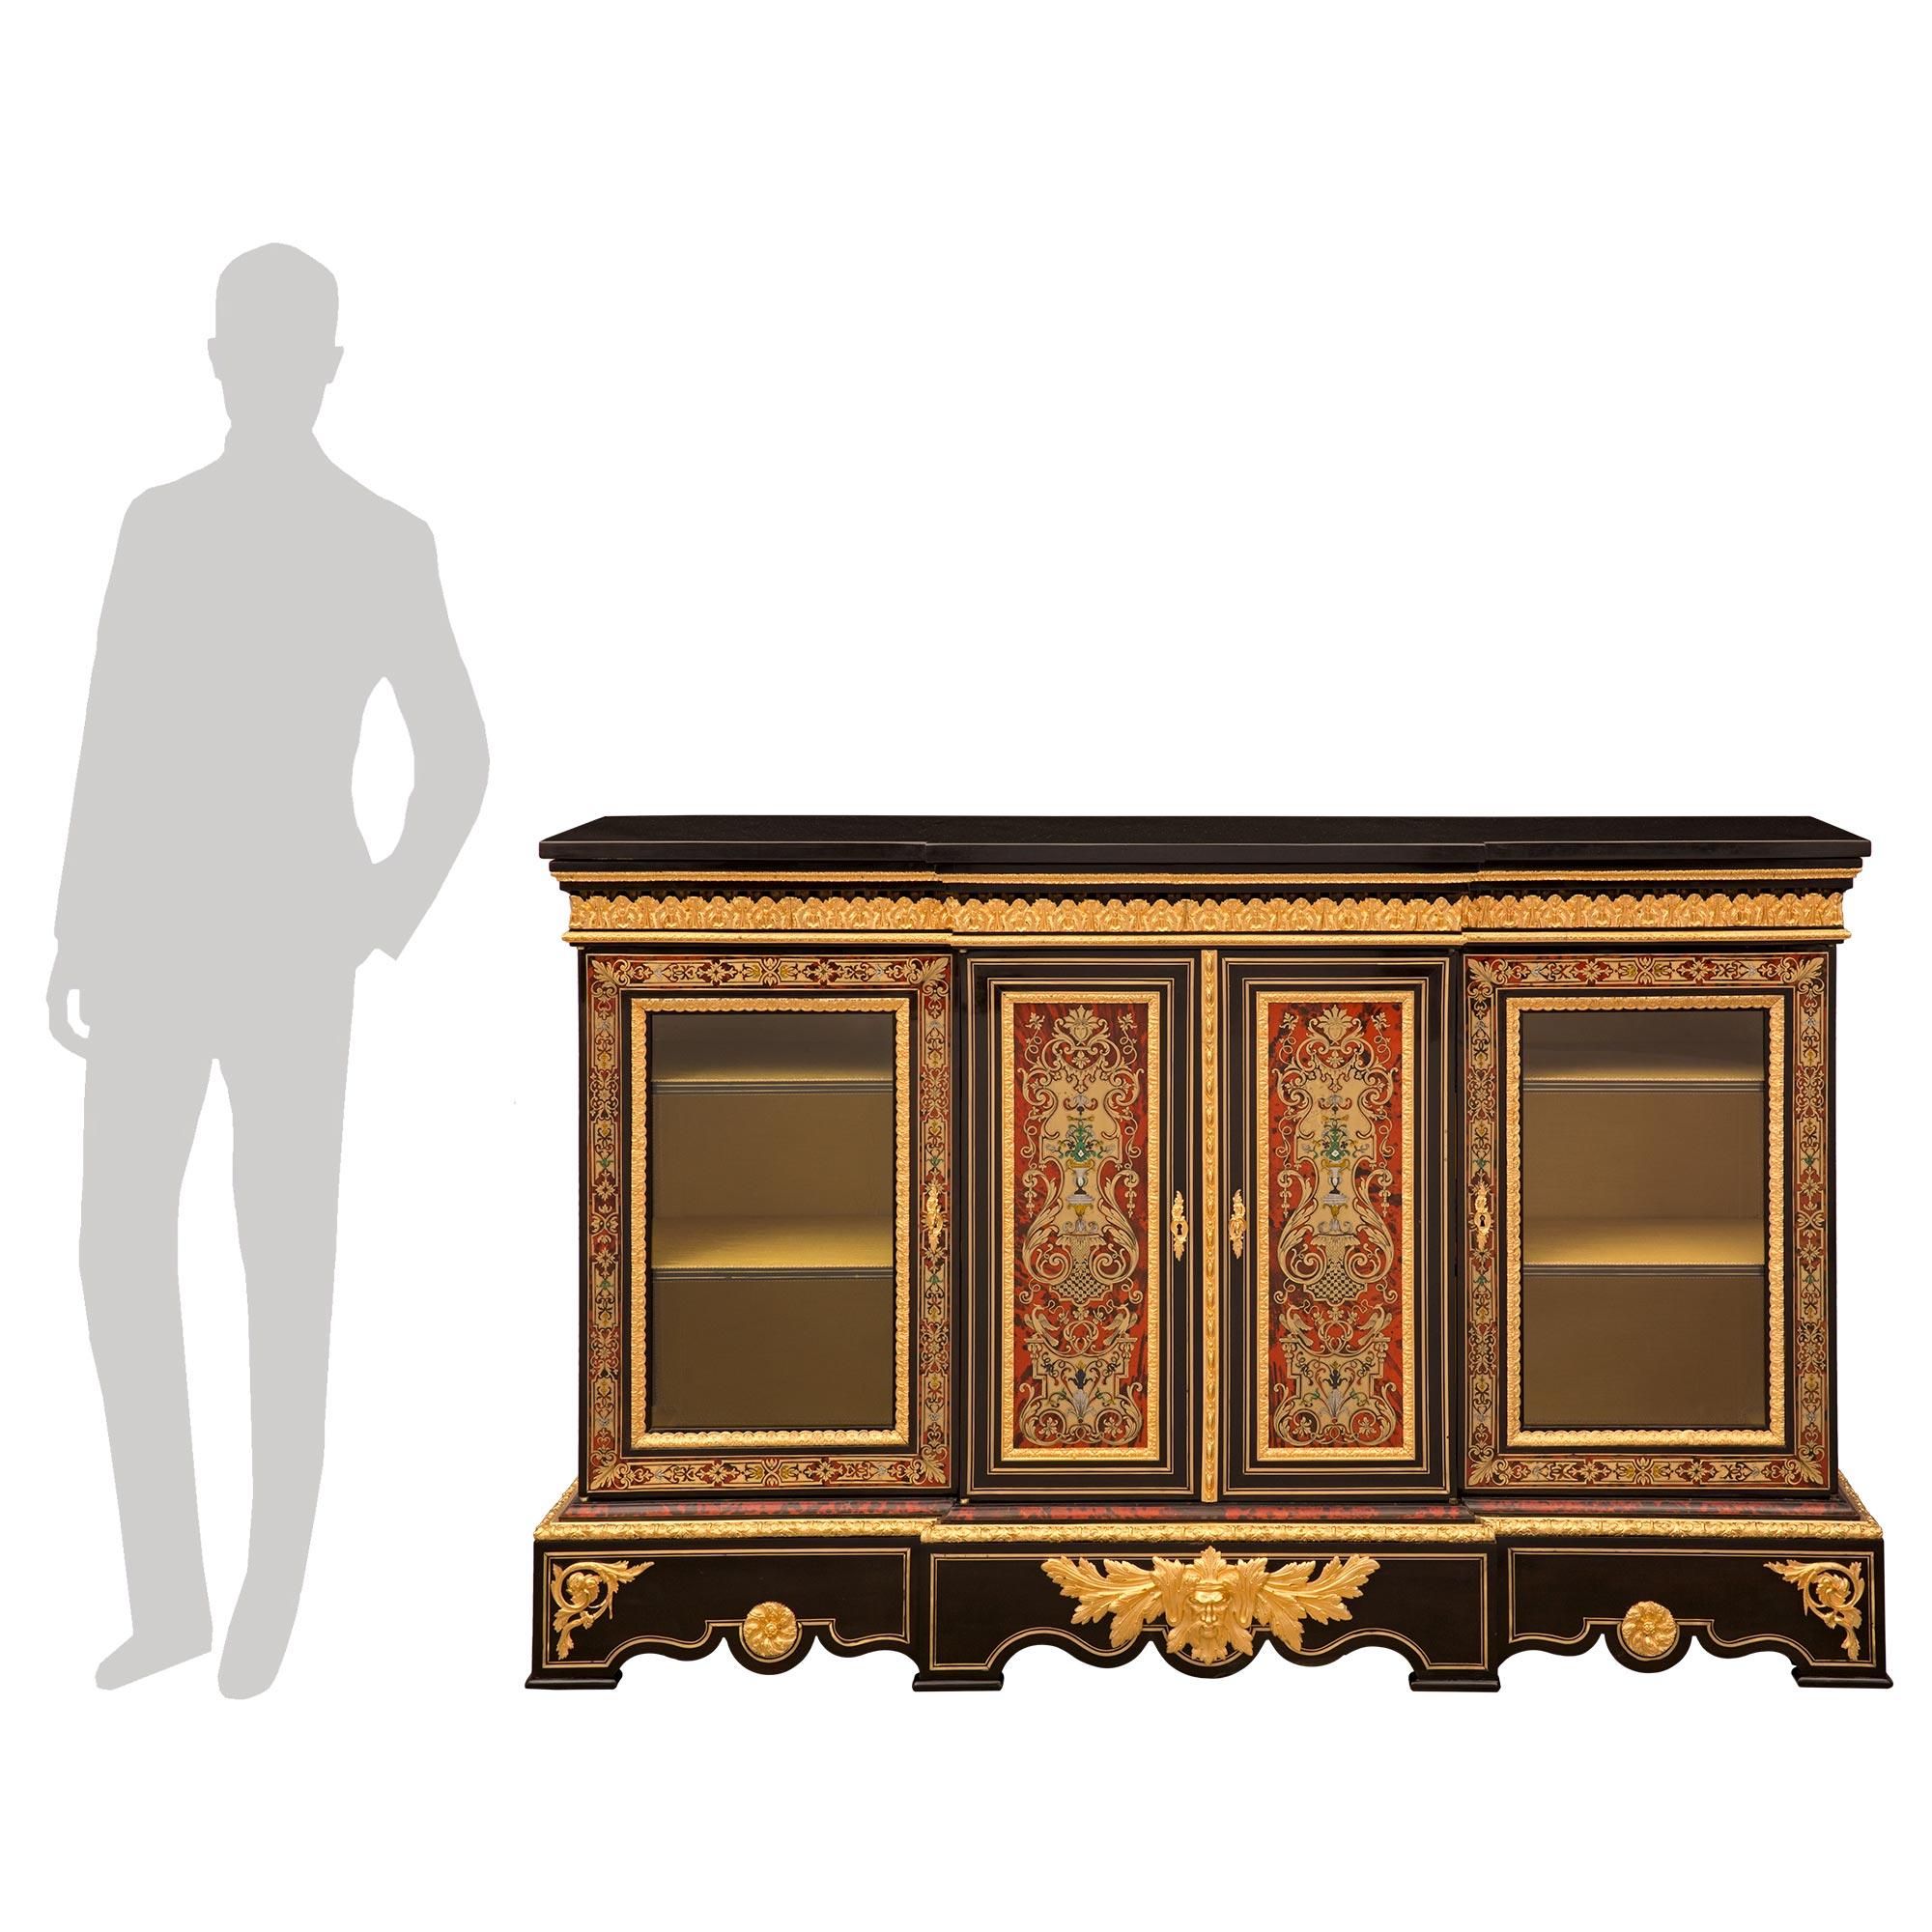 A stunning and most unique French 19th century Napoleon III Period ebony, ormolu, tortoiseshell, brass, pewter, Lapis Lazuli, mother of pearl, and black Belgian marble vitrine cabinet, signed Pretot. The four door buffet is raised by a beautiful